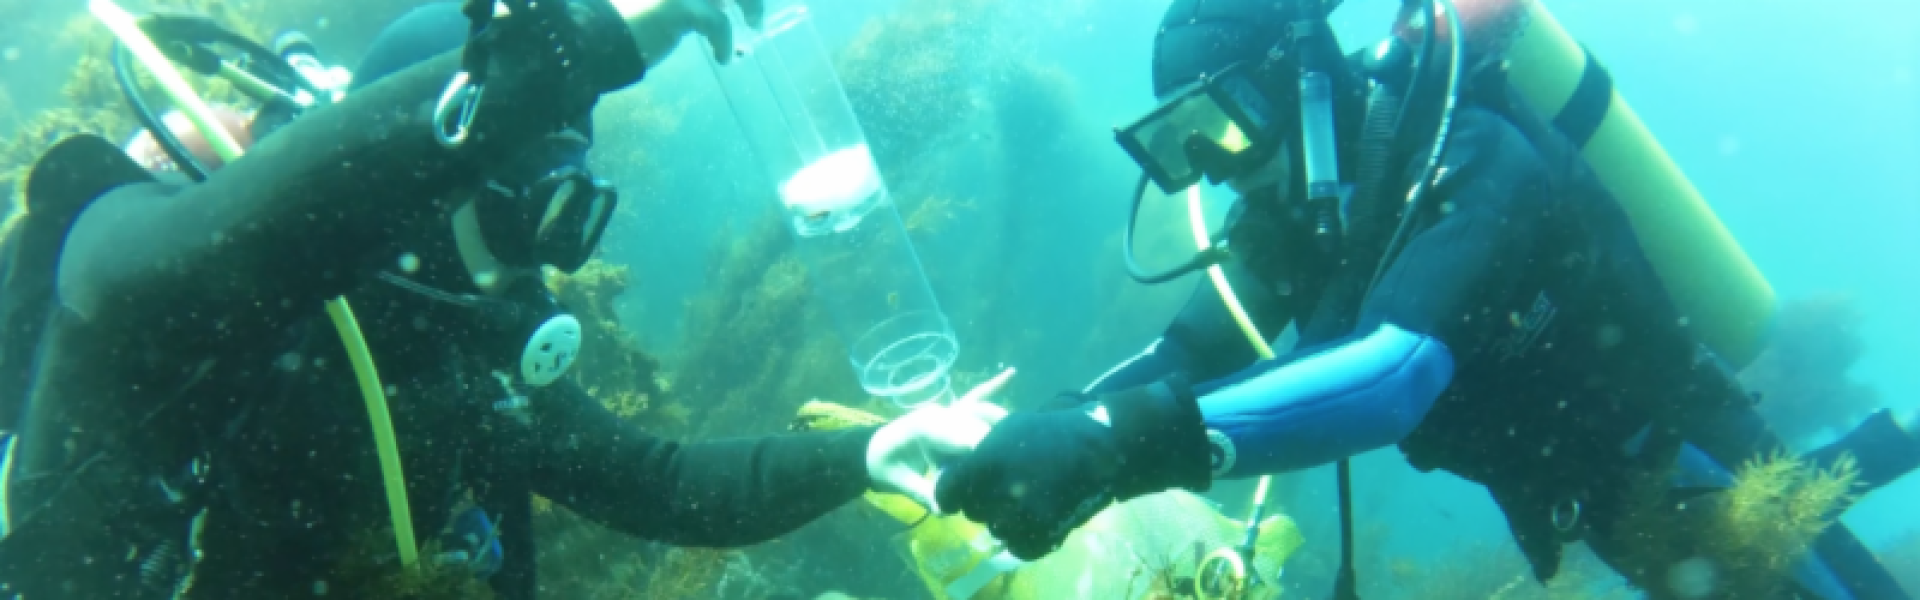 two divers underwater with collection tube